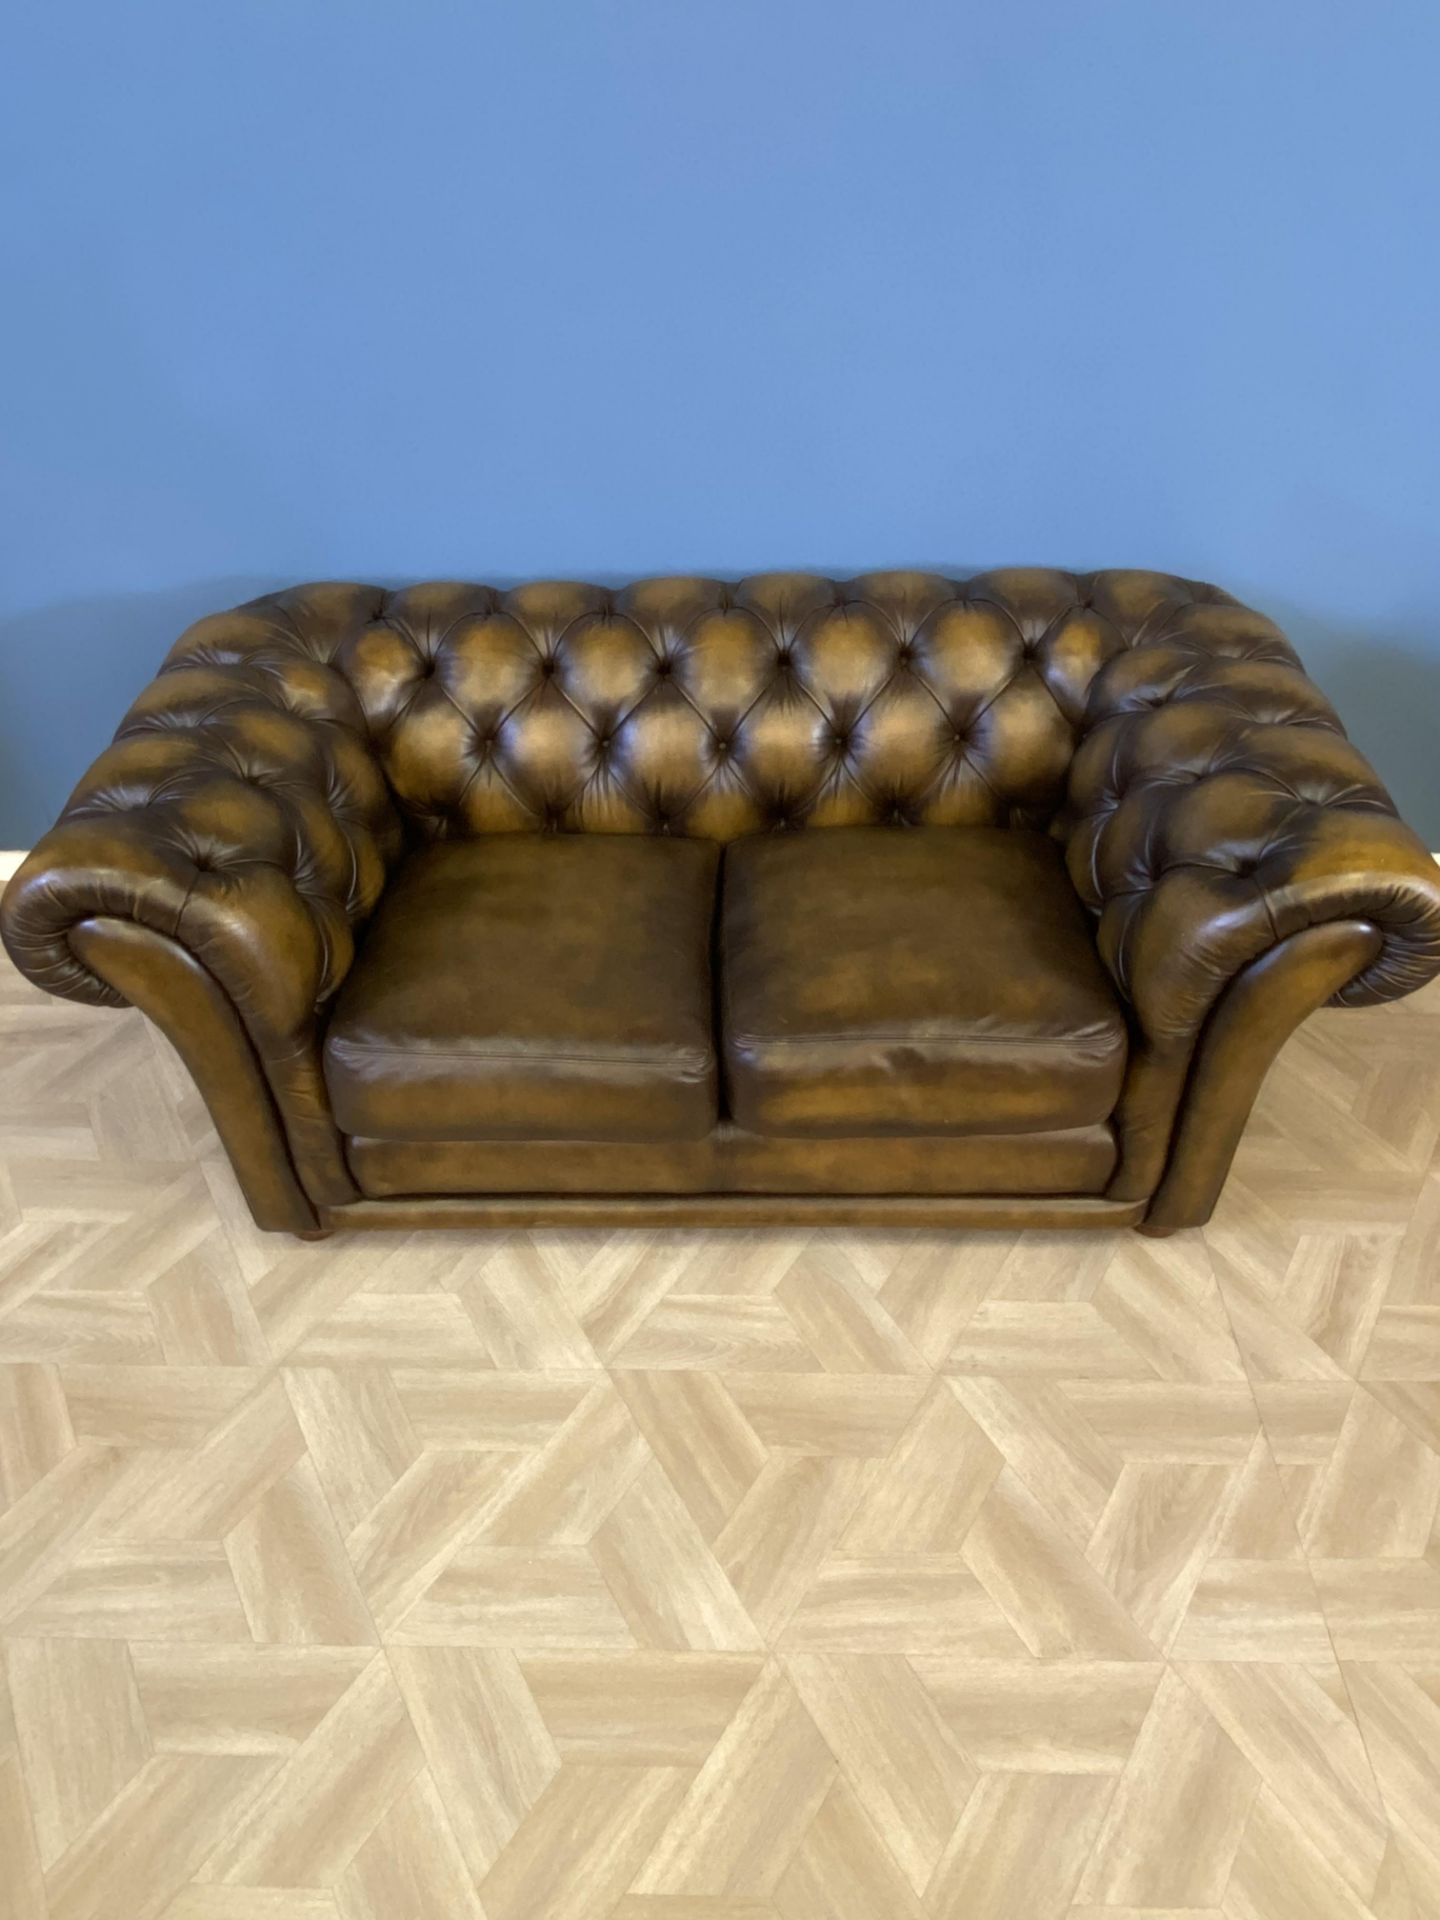 Button back leather two seat Chesterfield sofa - Image 2 of 10